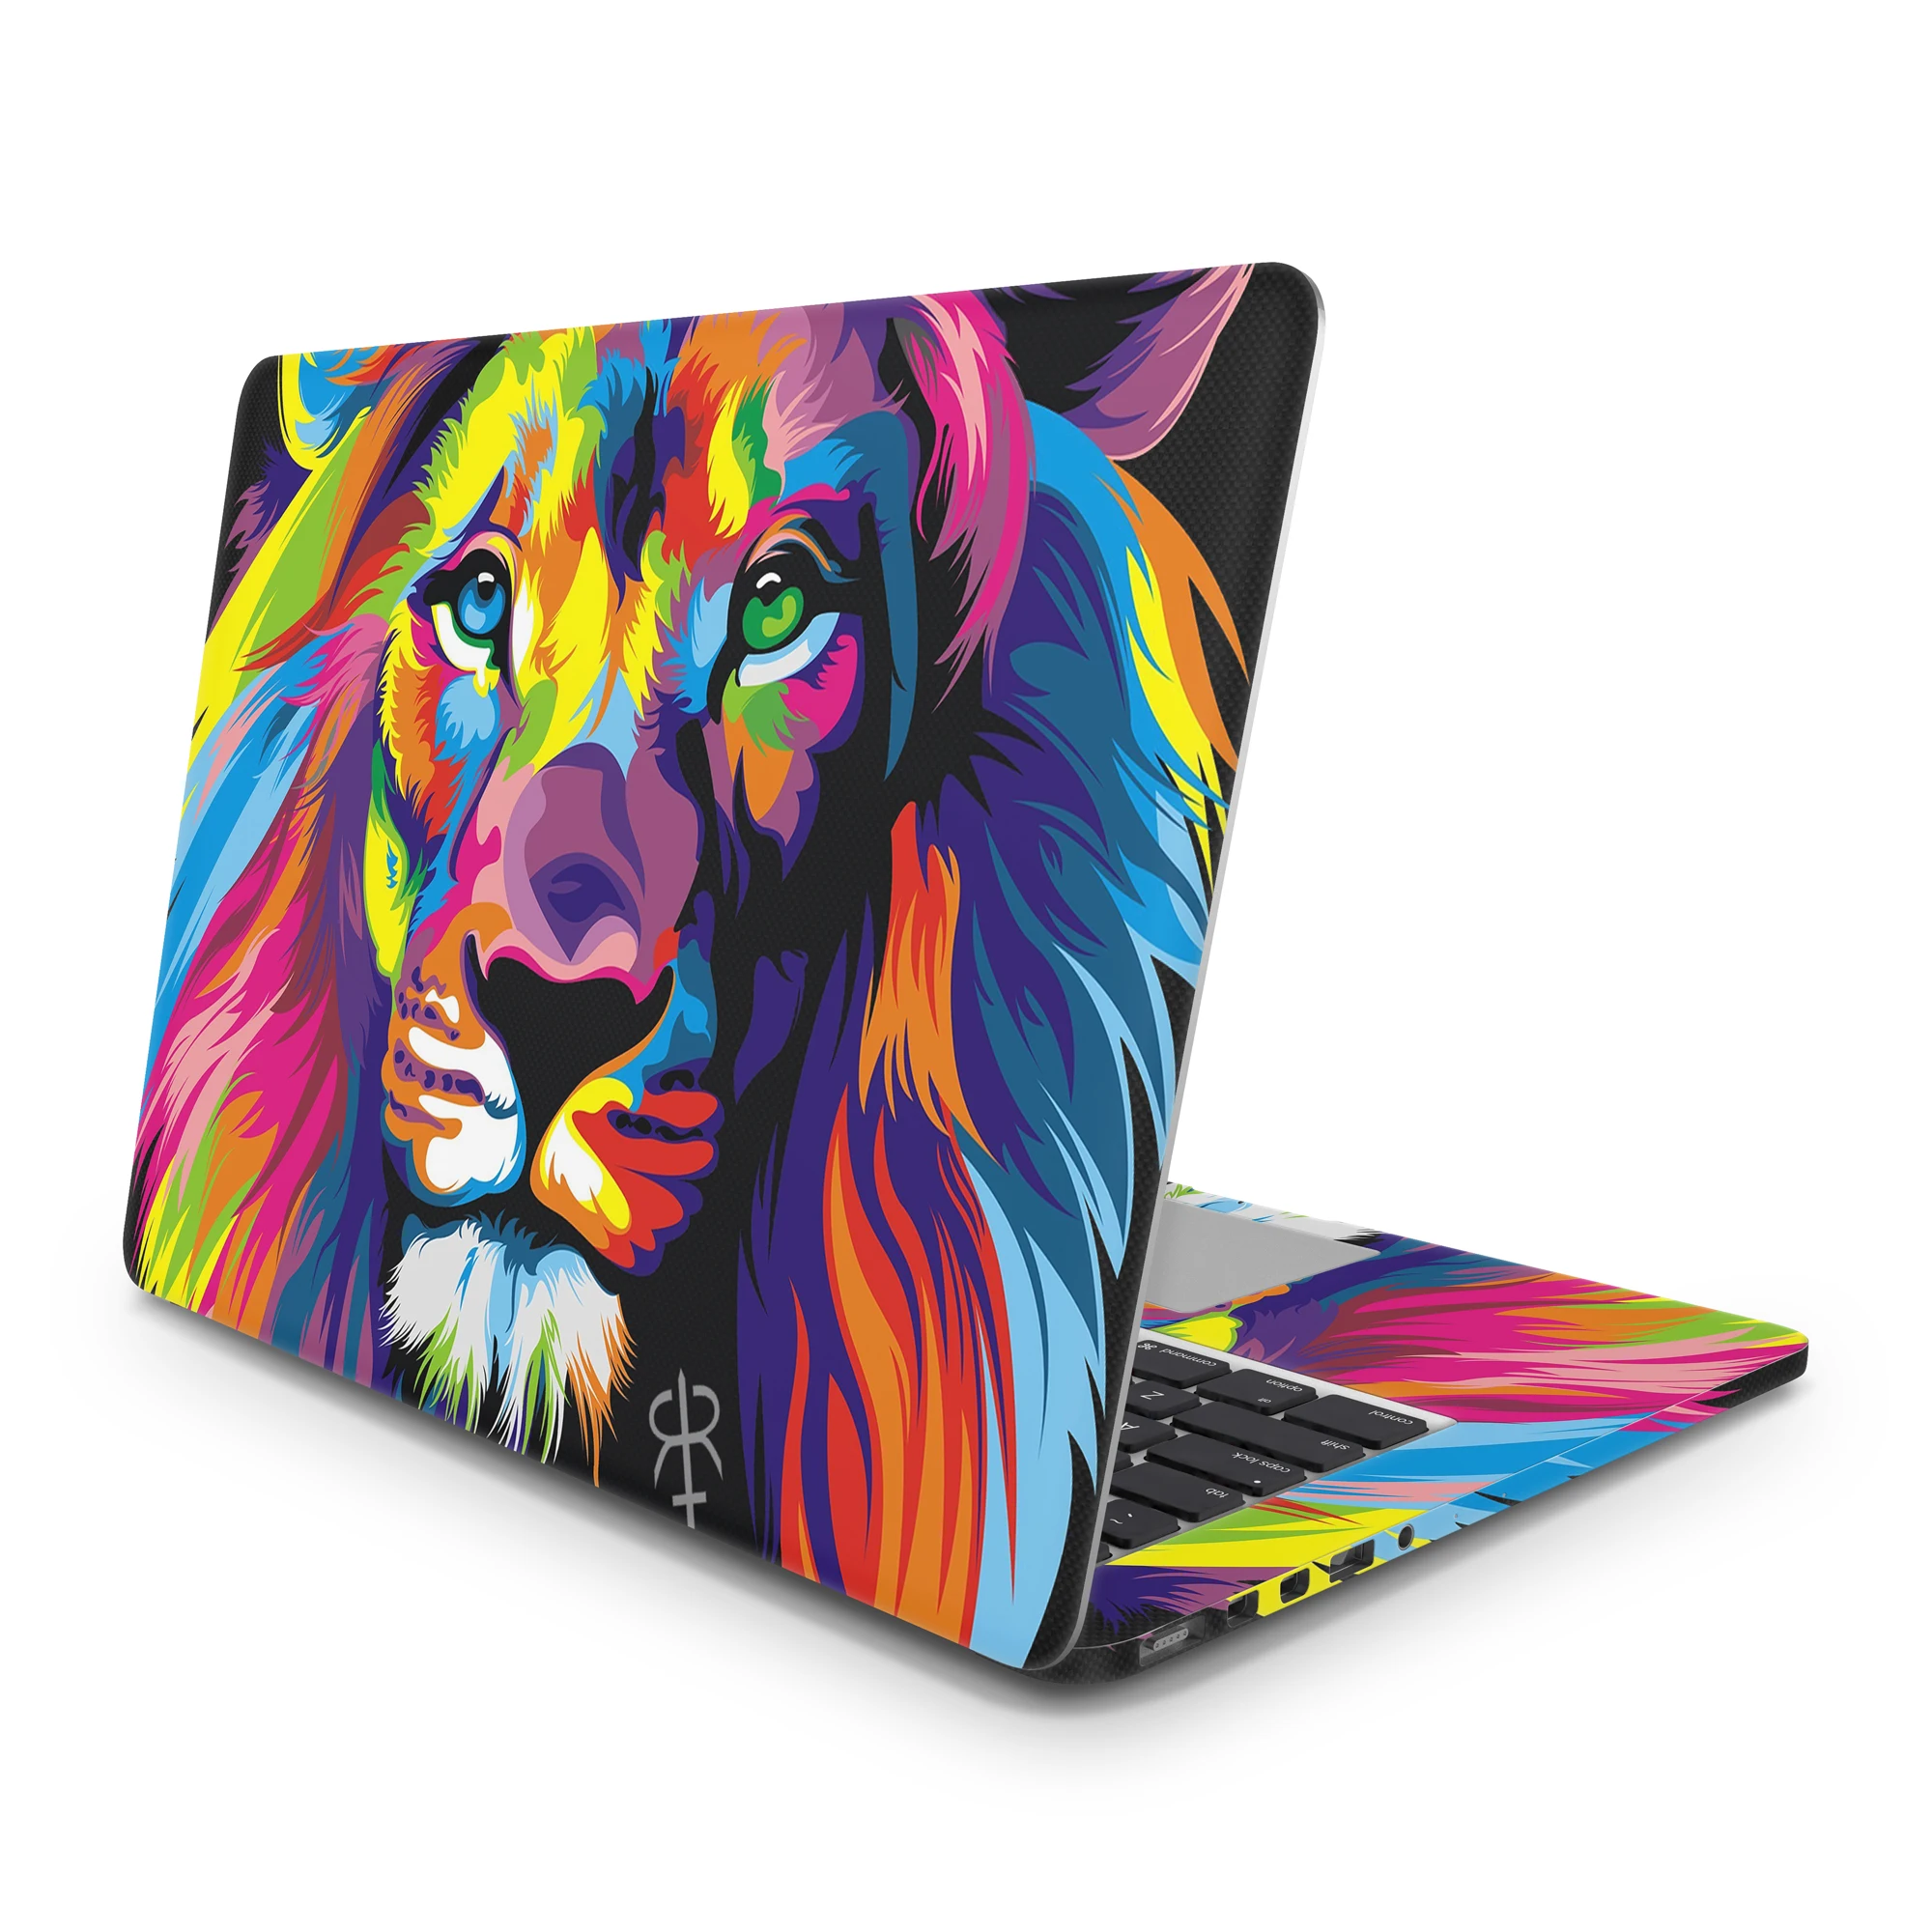 

Sticker Master Lion Laptop Vinyl Sticker Skin Cover For 10 12 13 14 15.4 15.6 16 17 19 " Inc Notebook Decal For Macbook,Asus,Acer,Hp,Lenovo,Huawei,Dell,Msi,Apple,Toshiba,Compaq